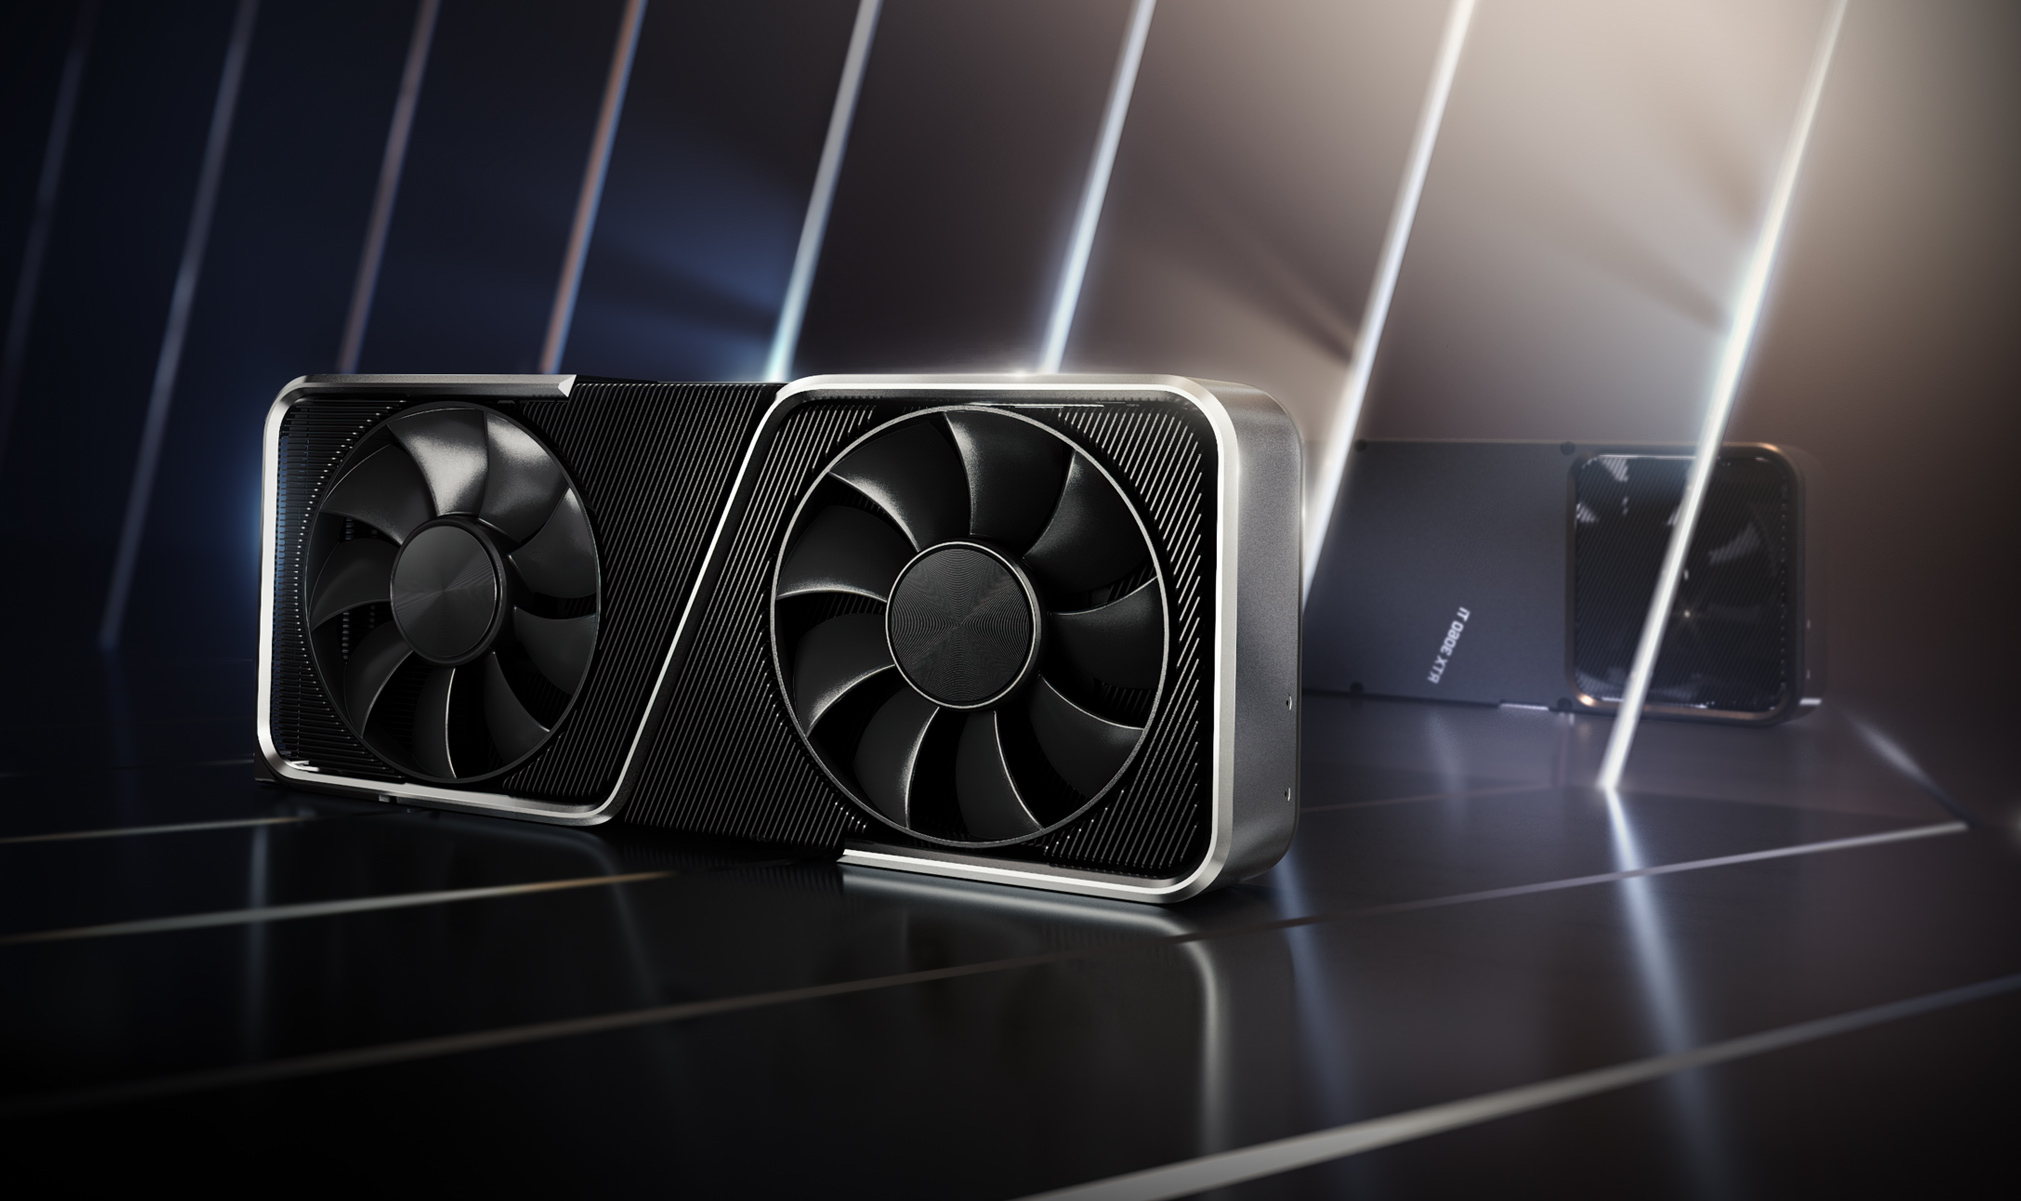 NVIDIA GeForce RTX 3060 Ti Full Specs Leak Out, 4864 Cores & 8 GB